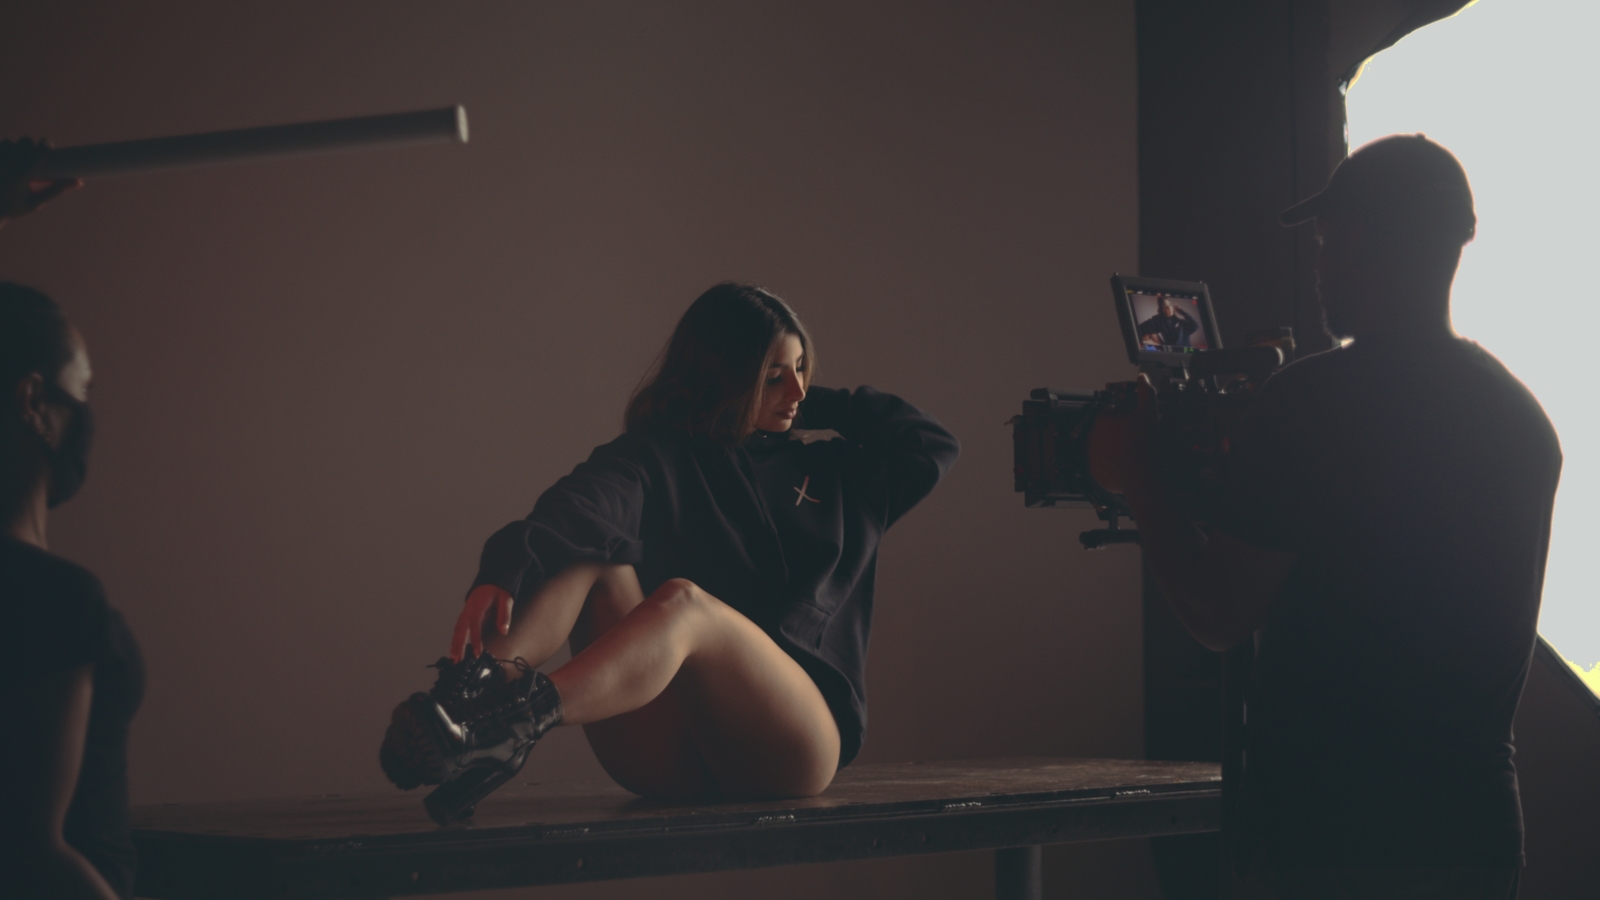 View from behind of Joshua filming a woman posing wearing a black cropped sweatshirt